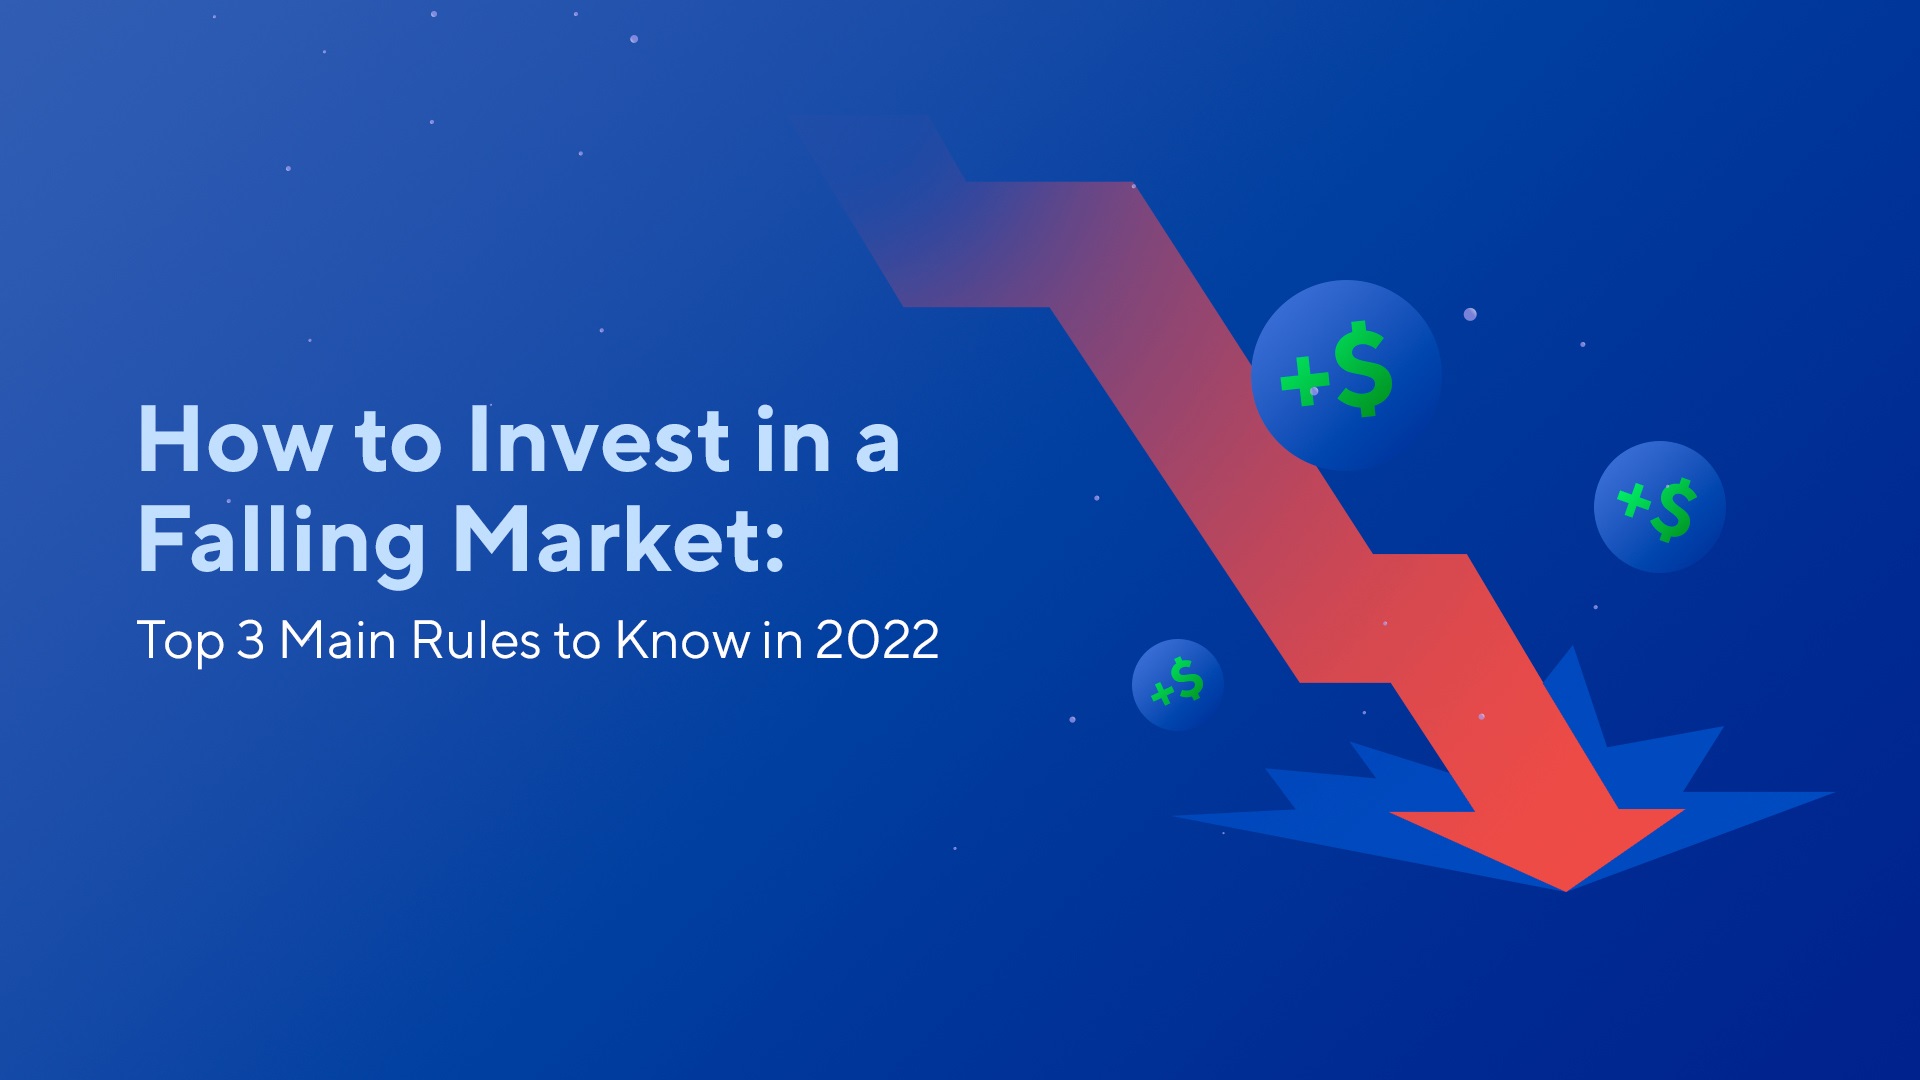 How to Invest in a Falling Market: Top 3 Main Rules to Know in 2022